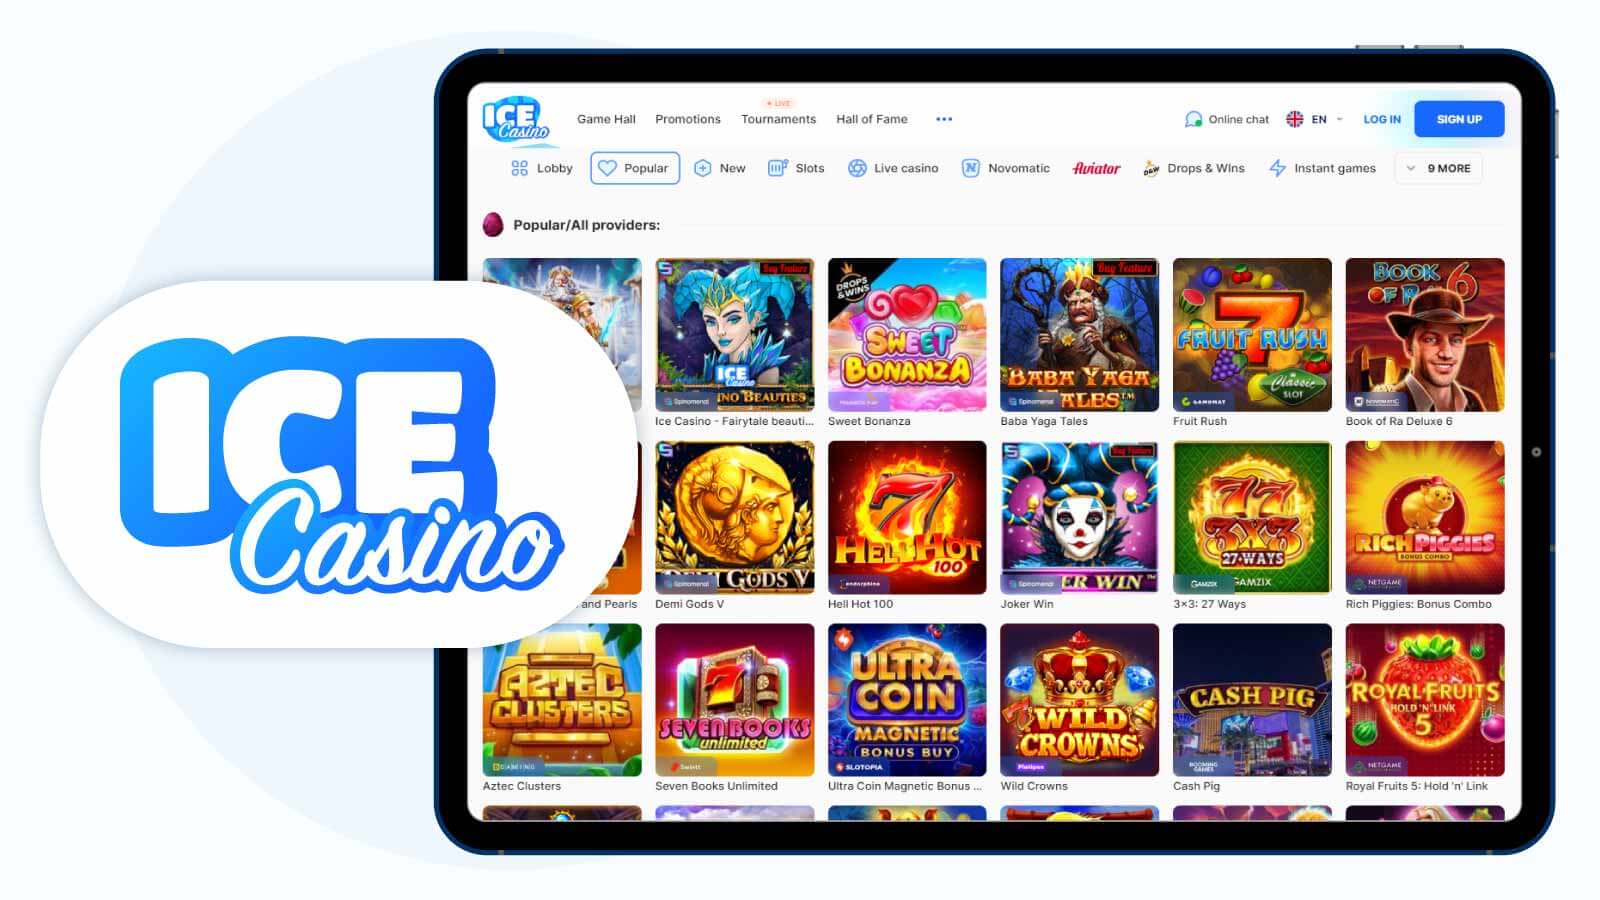 IceCasino Verify Your Phone Number and Grab Your $25 Free Spino No Deposit